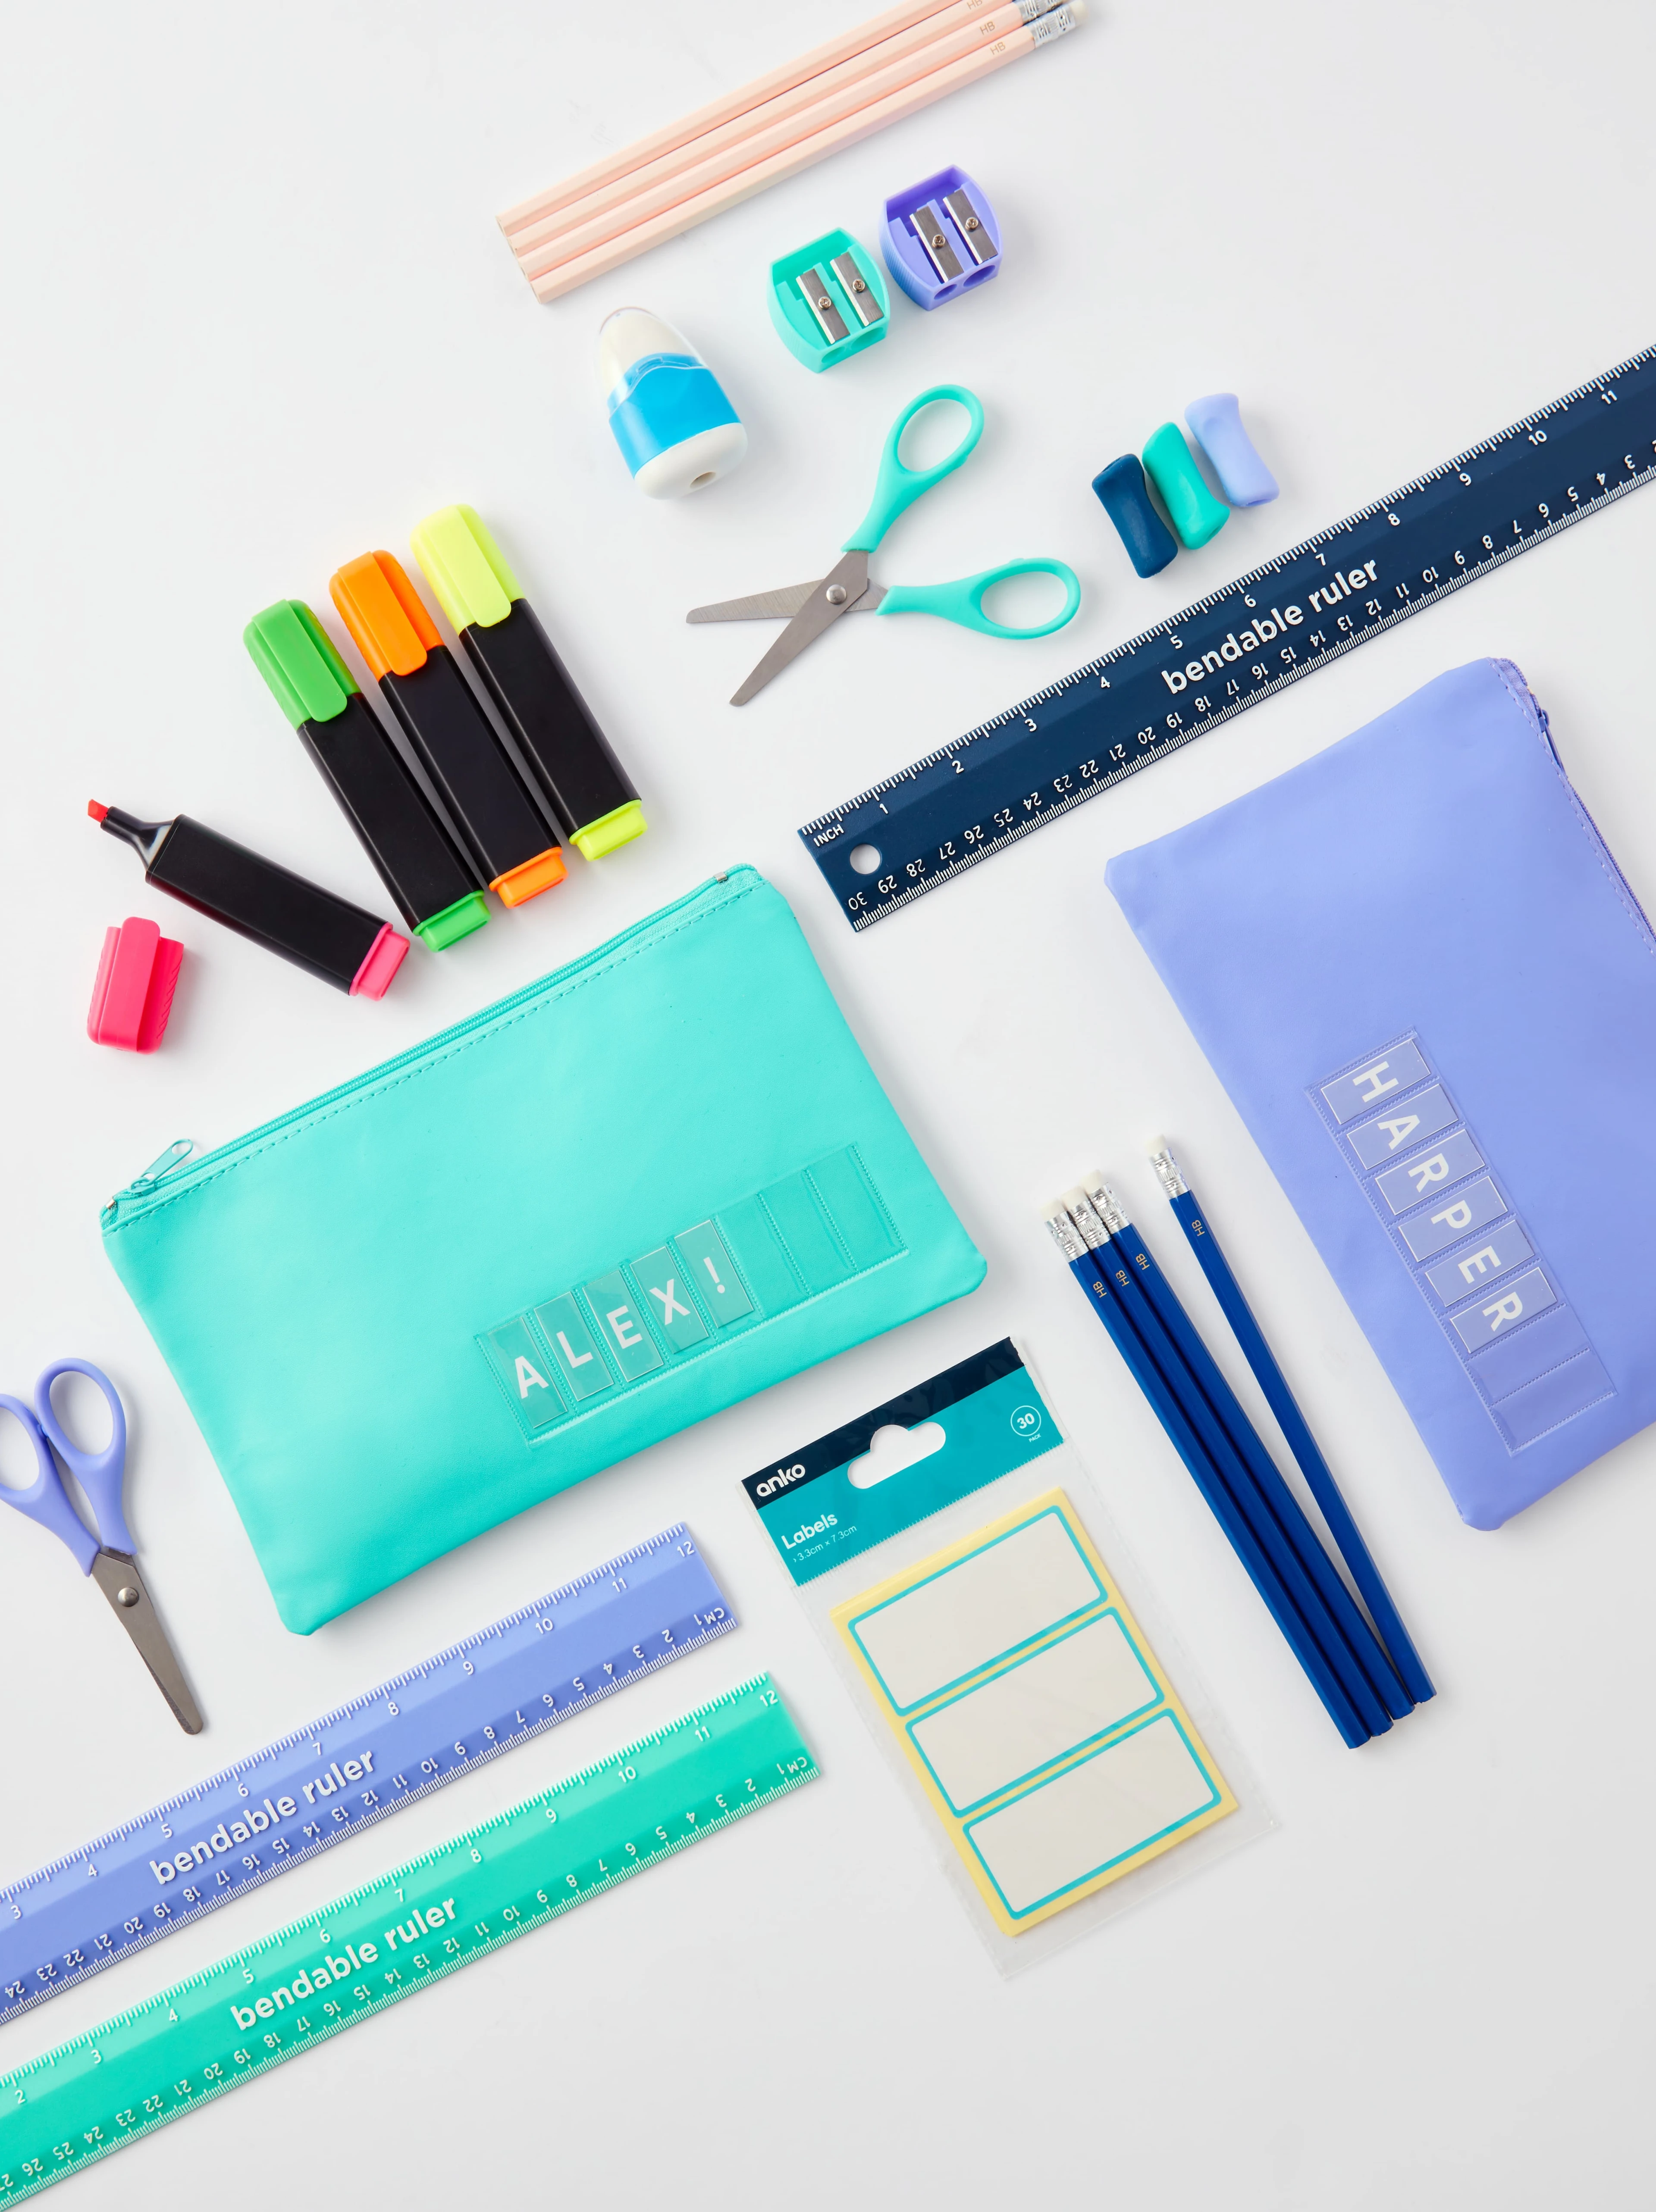 Shop All Stationery & Office Supp